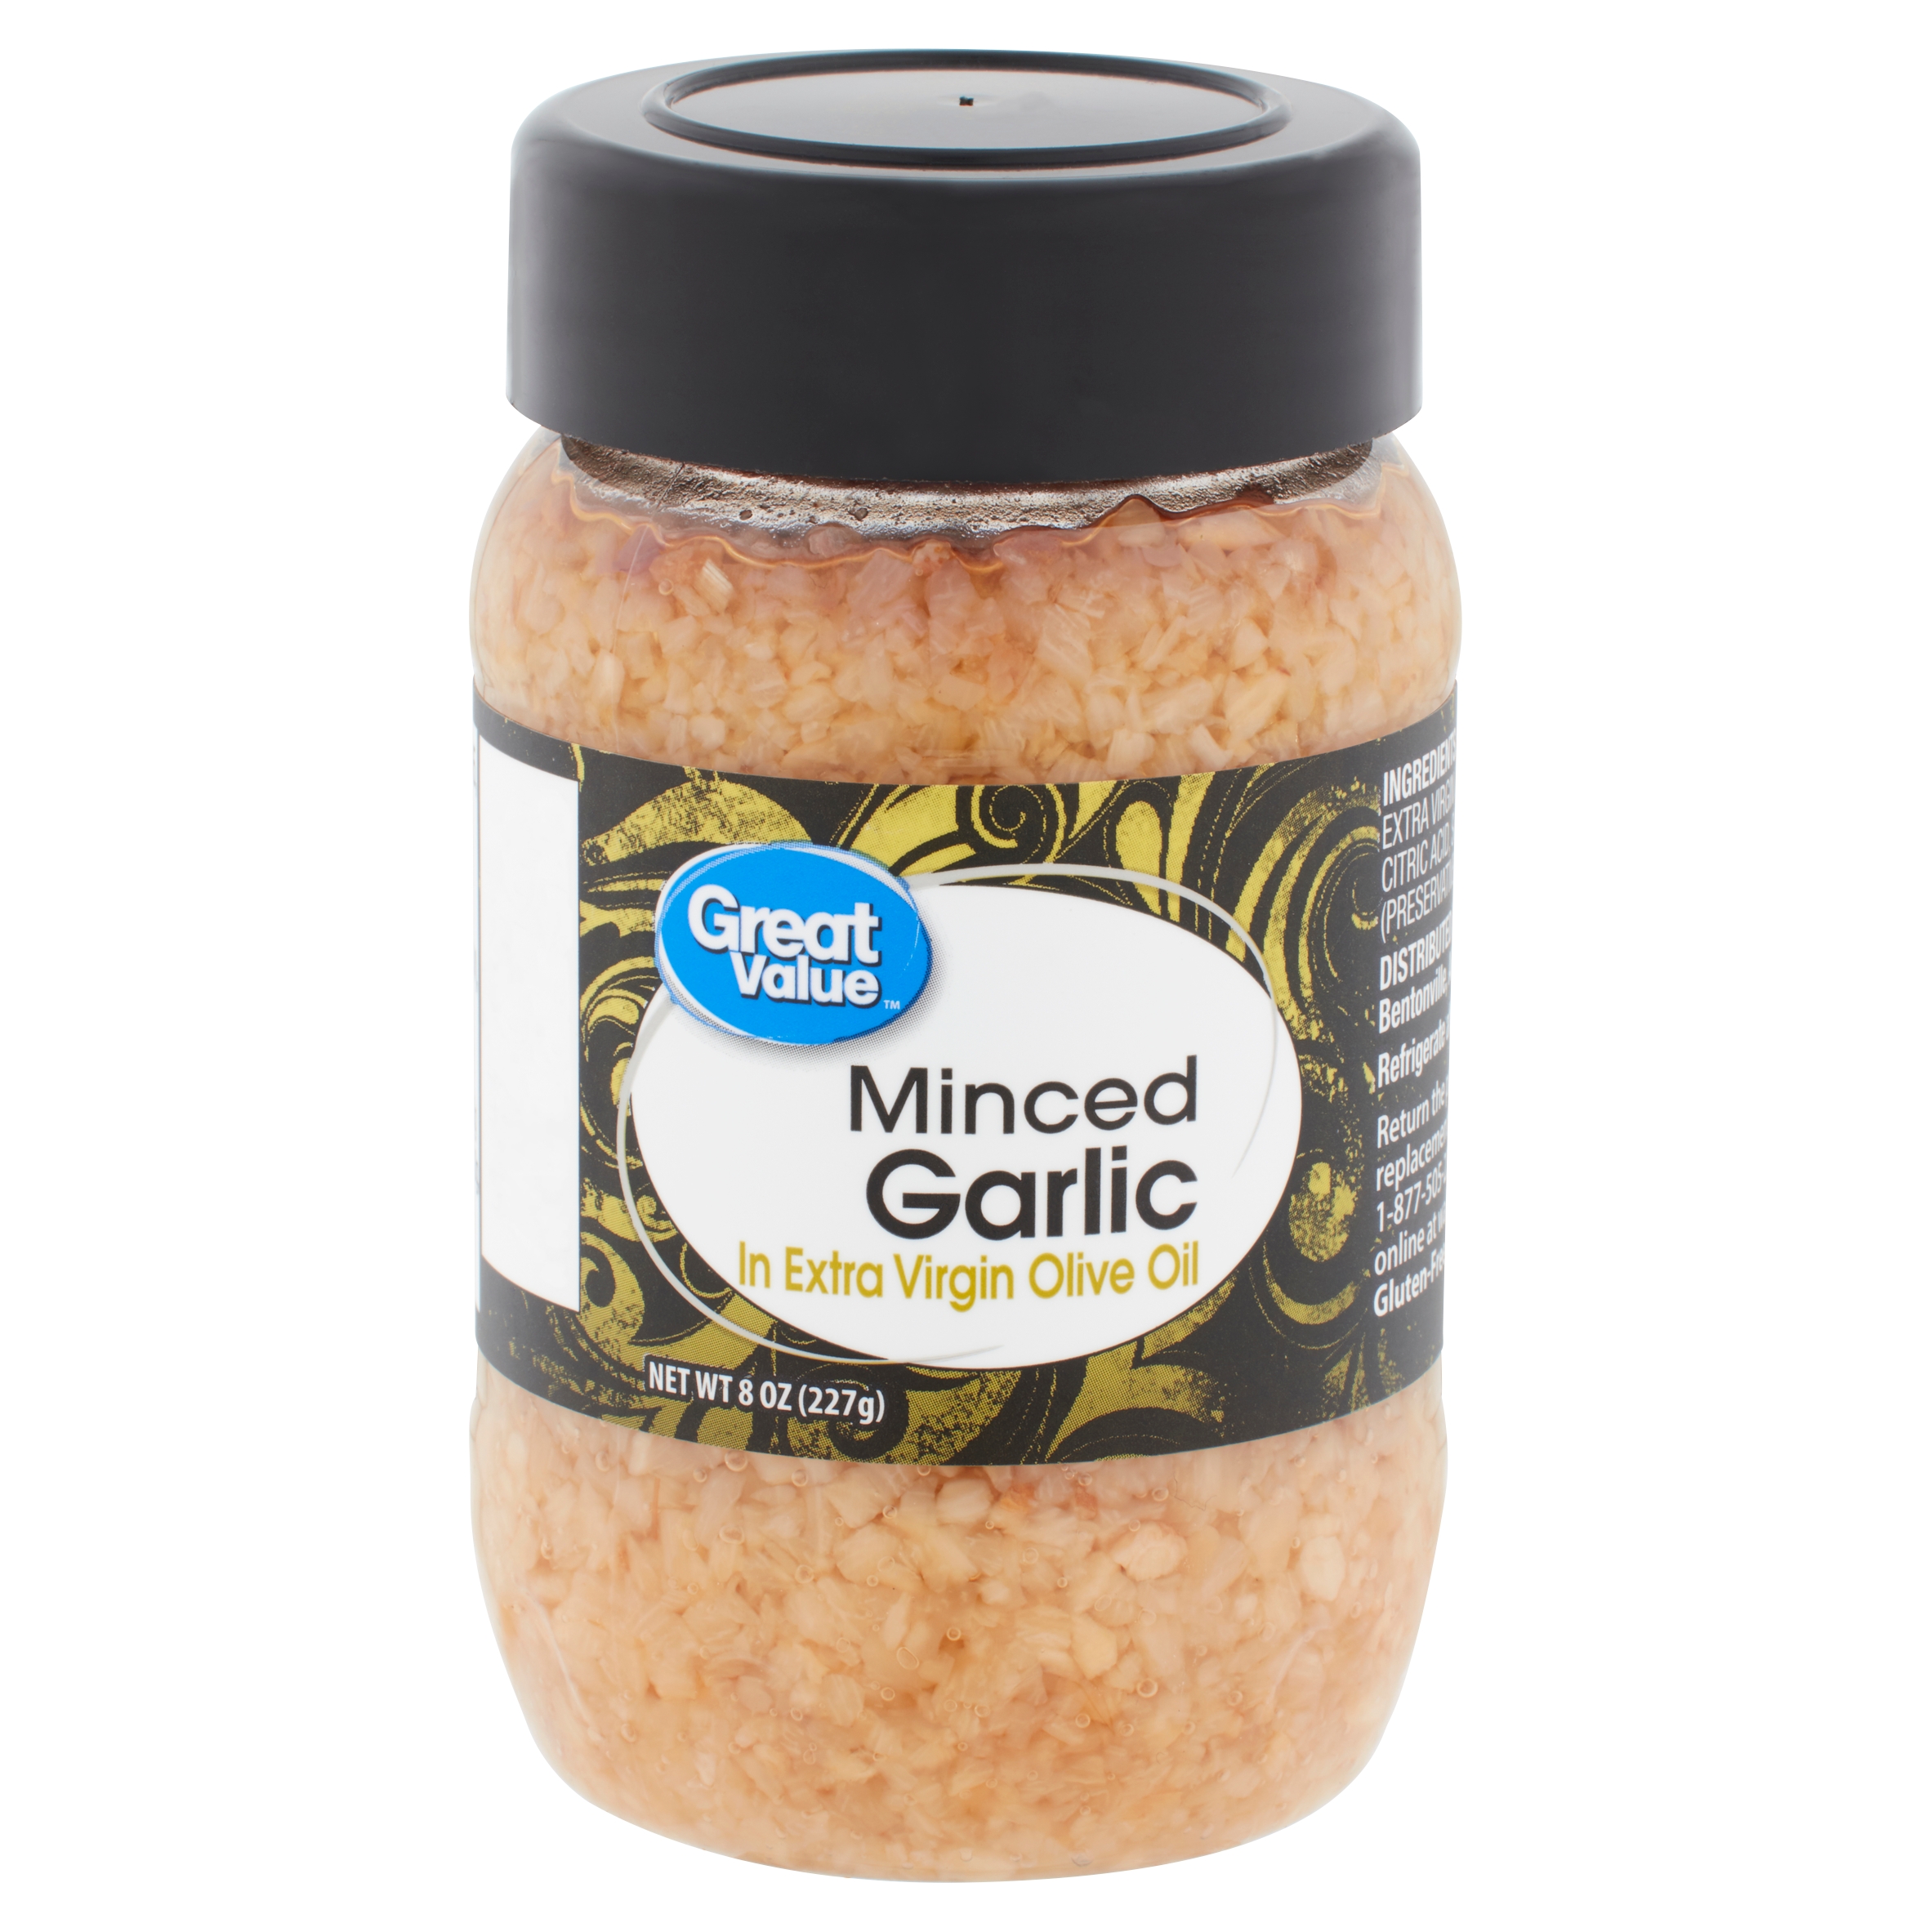 Great Value Minced Garlic in Extra Virgin Olive Oil, 8 Oz